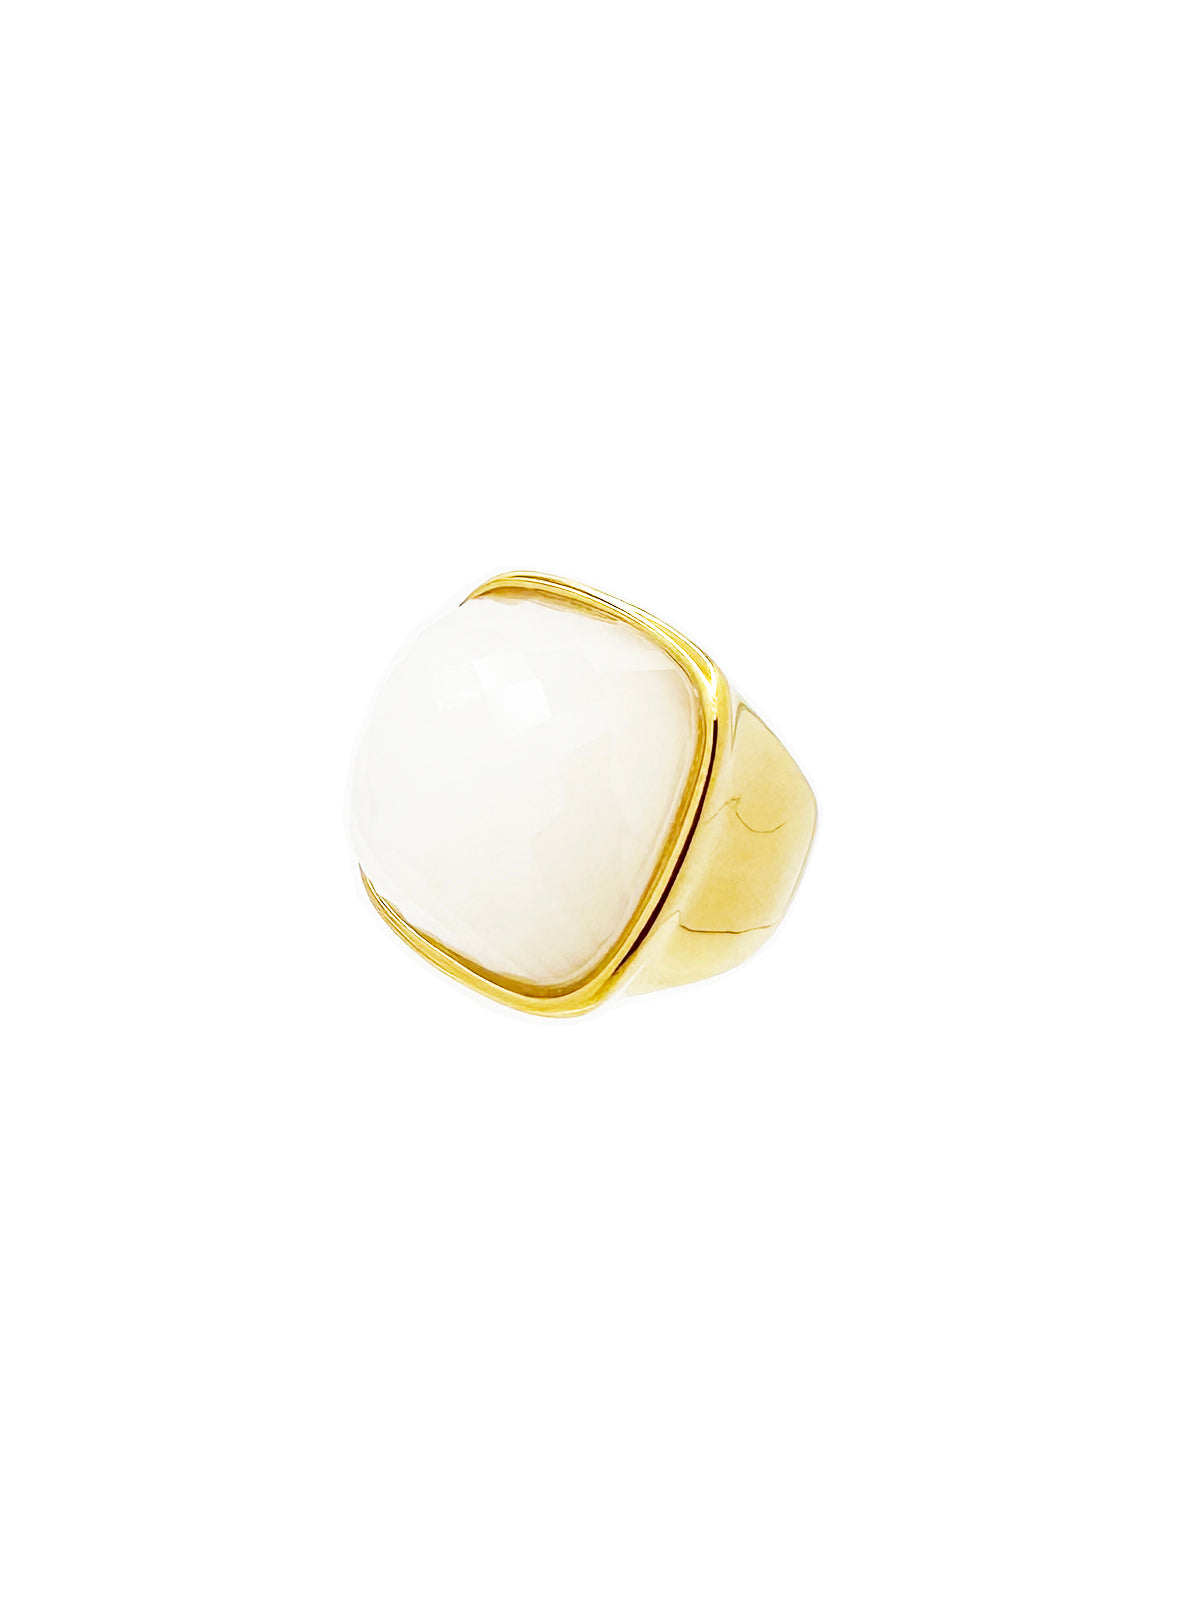 COCKTAIL RING - PEARL